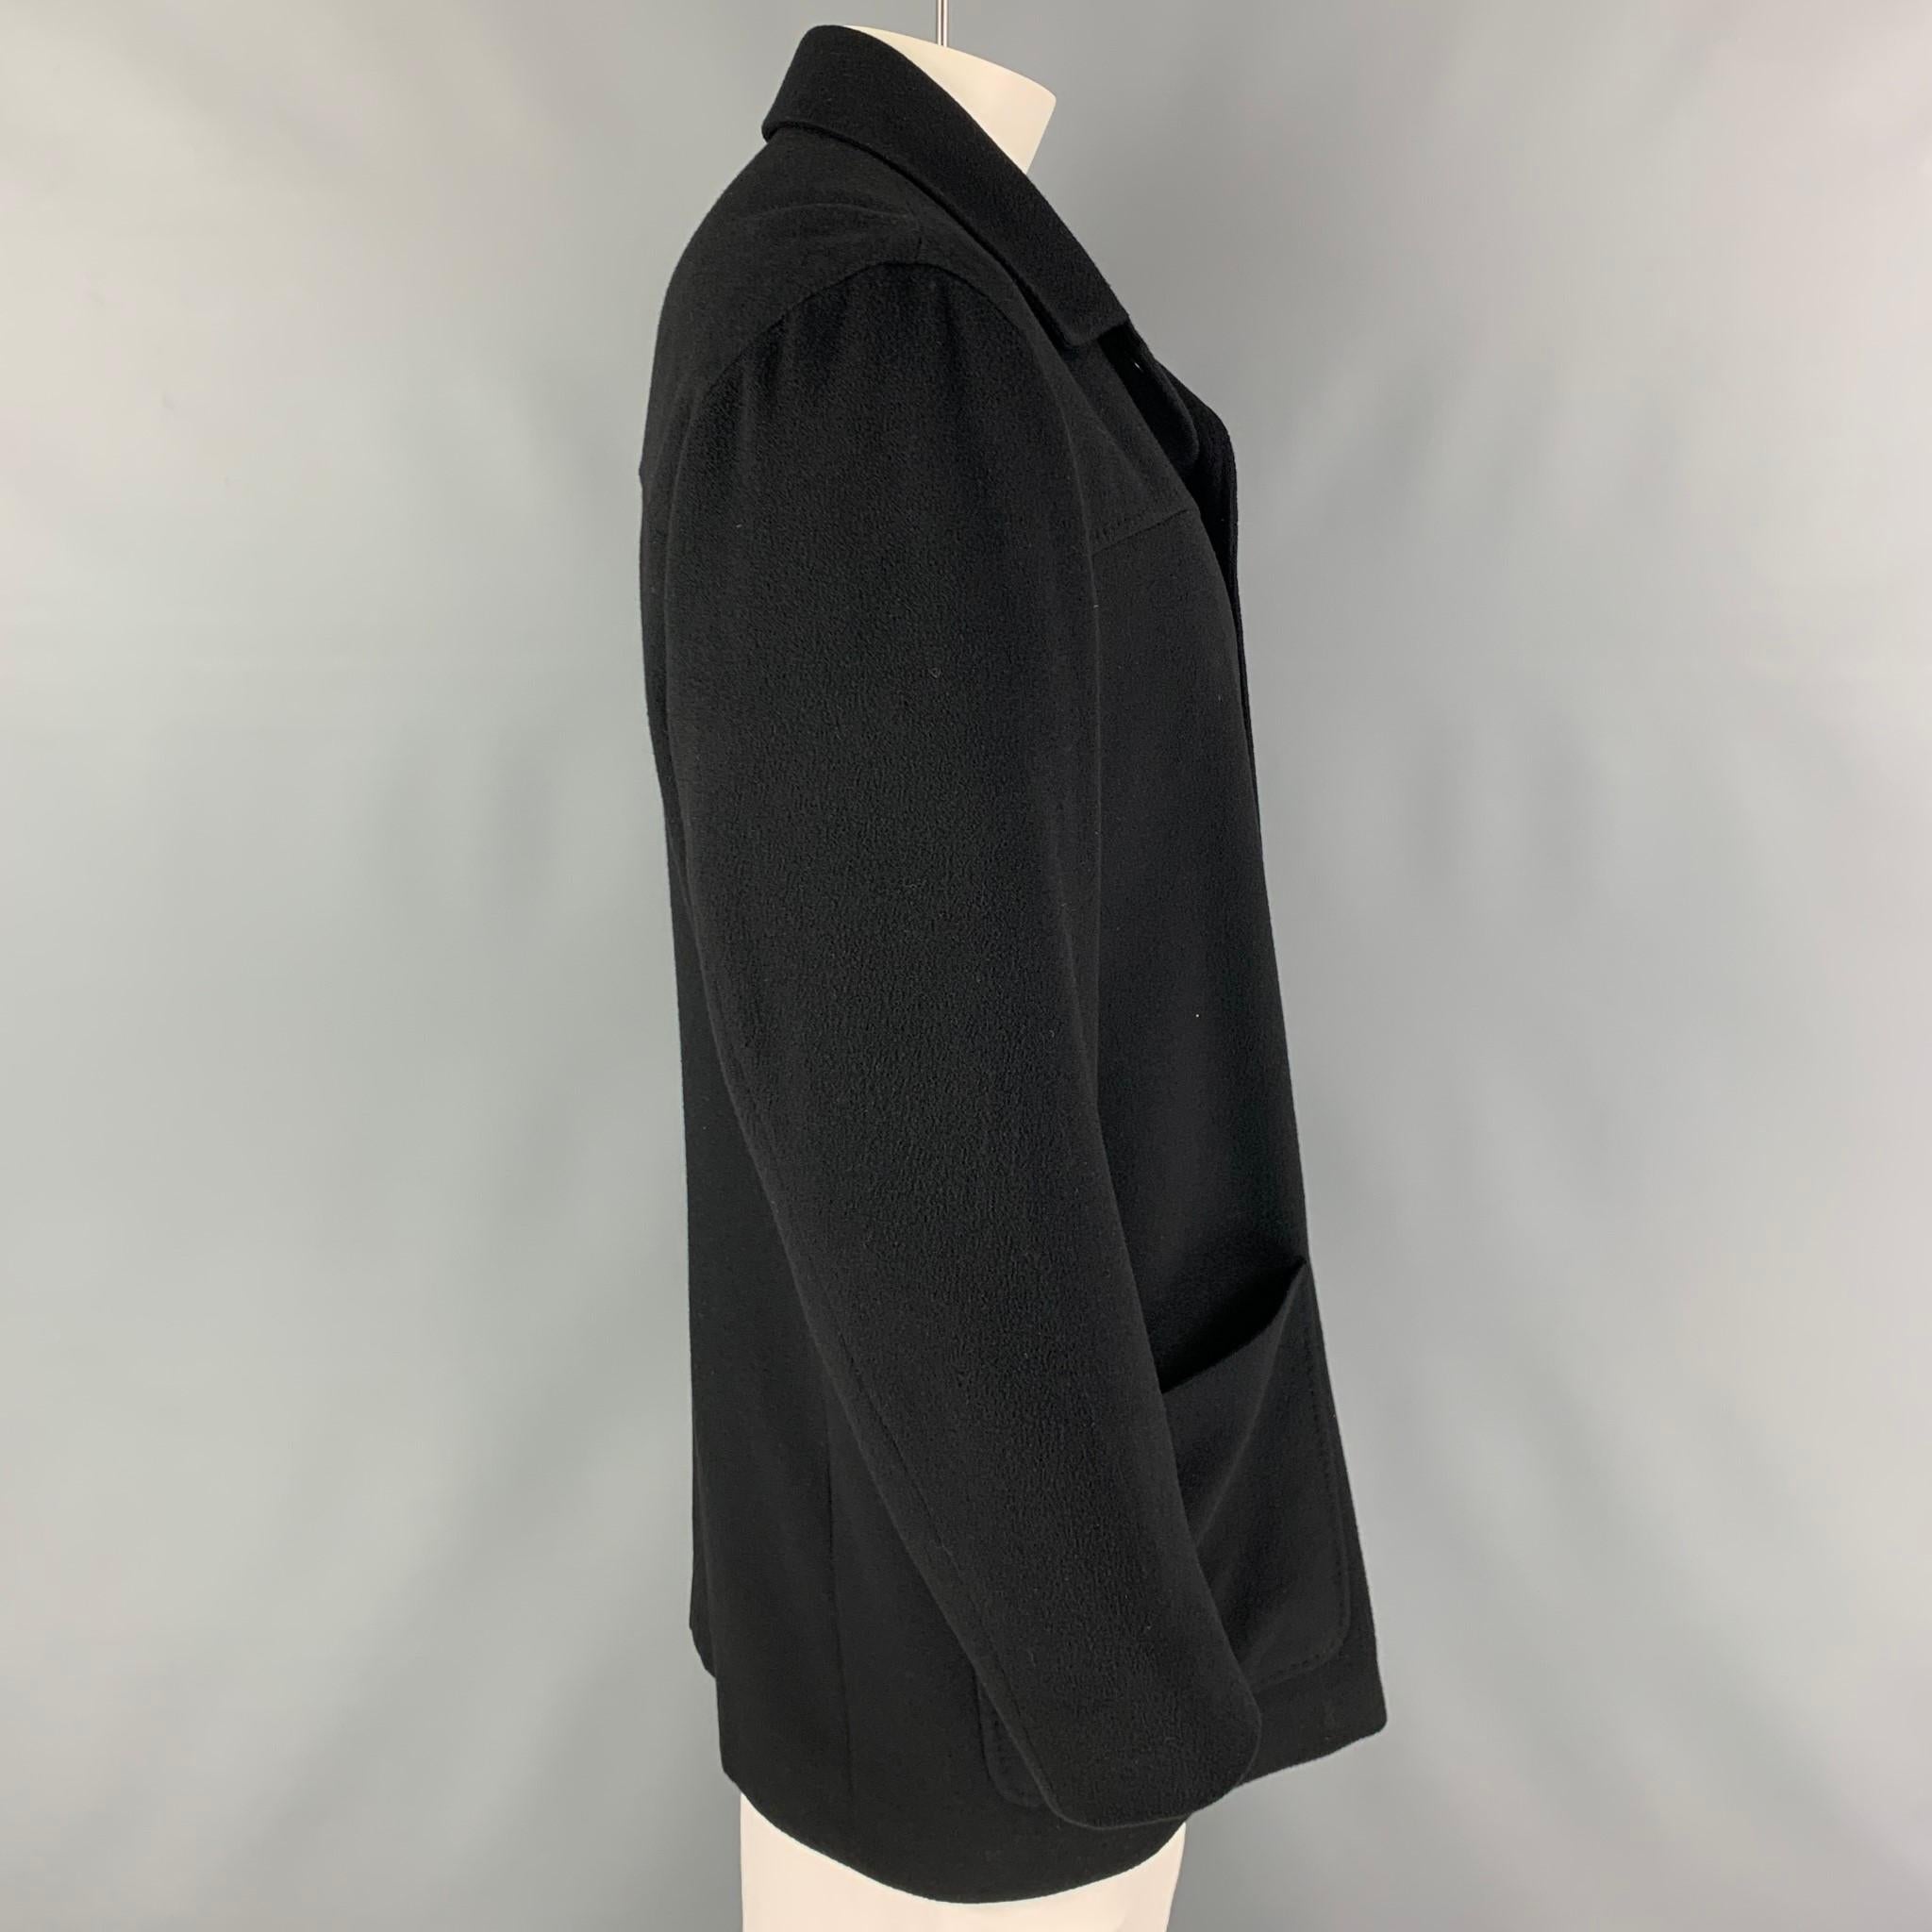 ERMENEGILDO ZEGNA jacket comes in a black cashmere with a full liner featuring a spread collar, patch pockets, and a buttoned closure. Made in Italy. 

Very Good Pre-Owned Condition.
Marked: L/52

Measurements:

Shoulder: 21 in.
Chest: 44